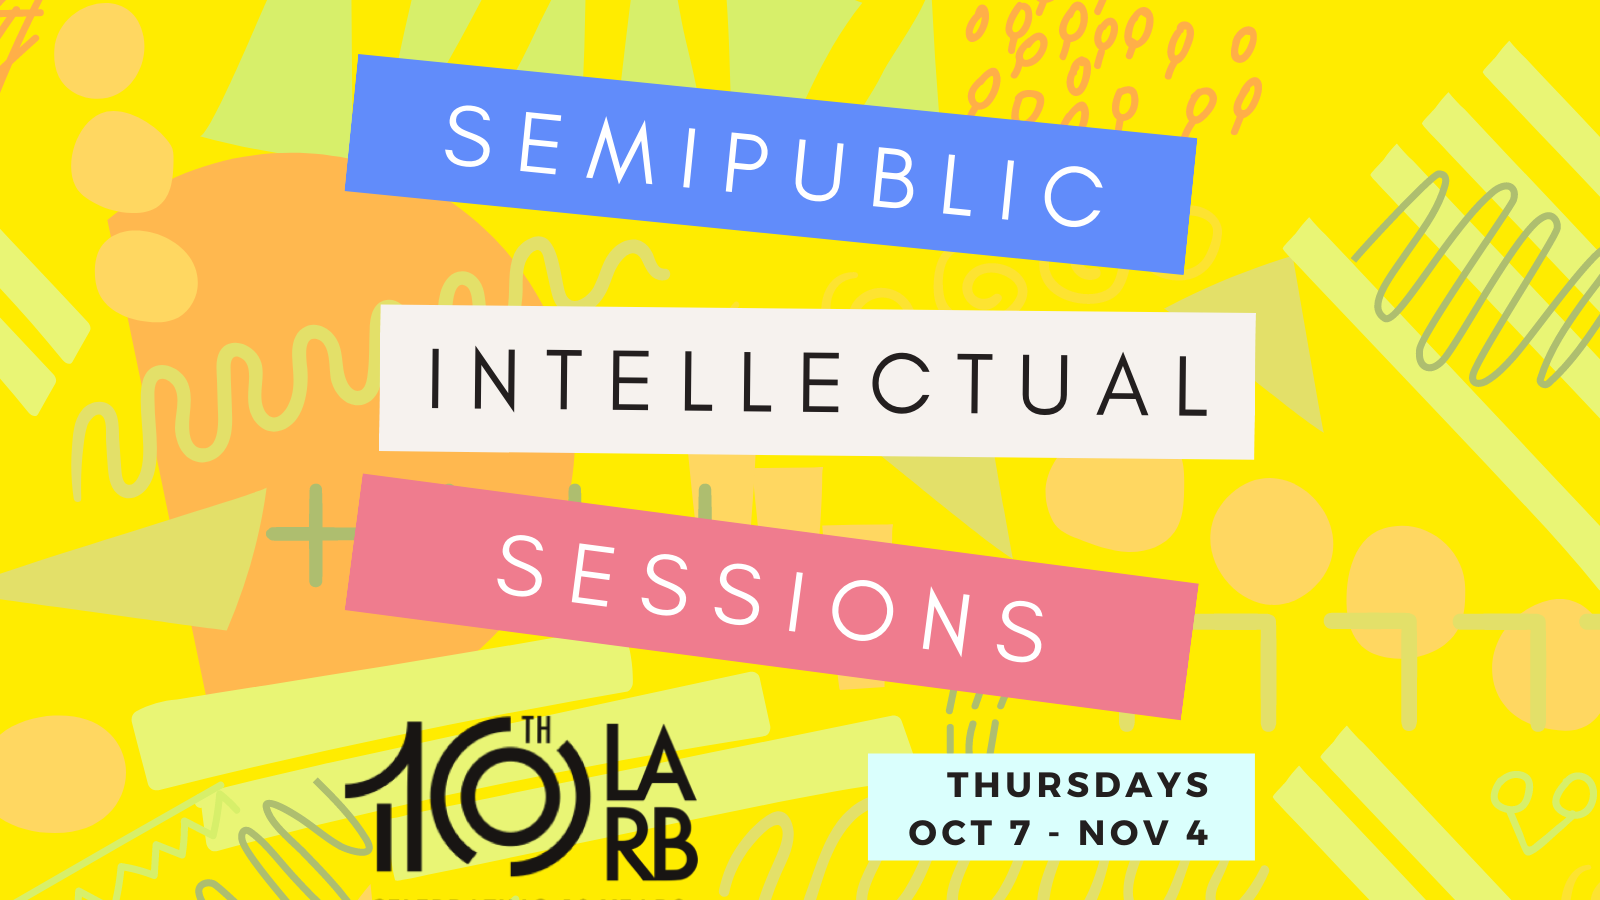 Announcing LARB's Semipublic Intellectual Sessions